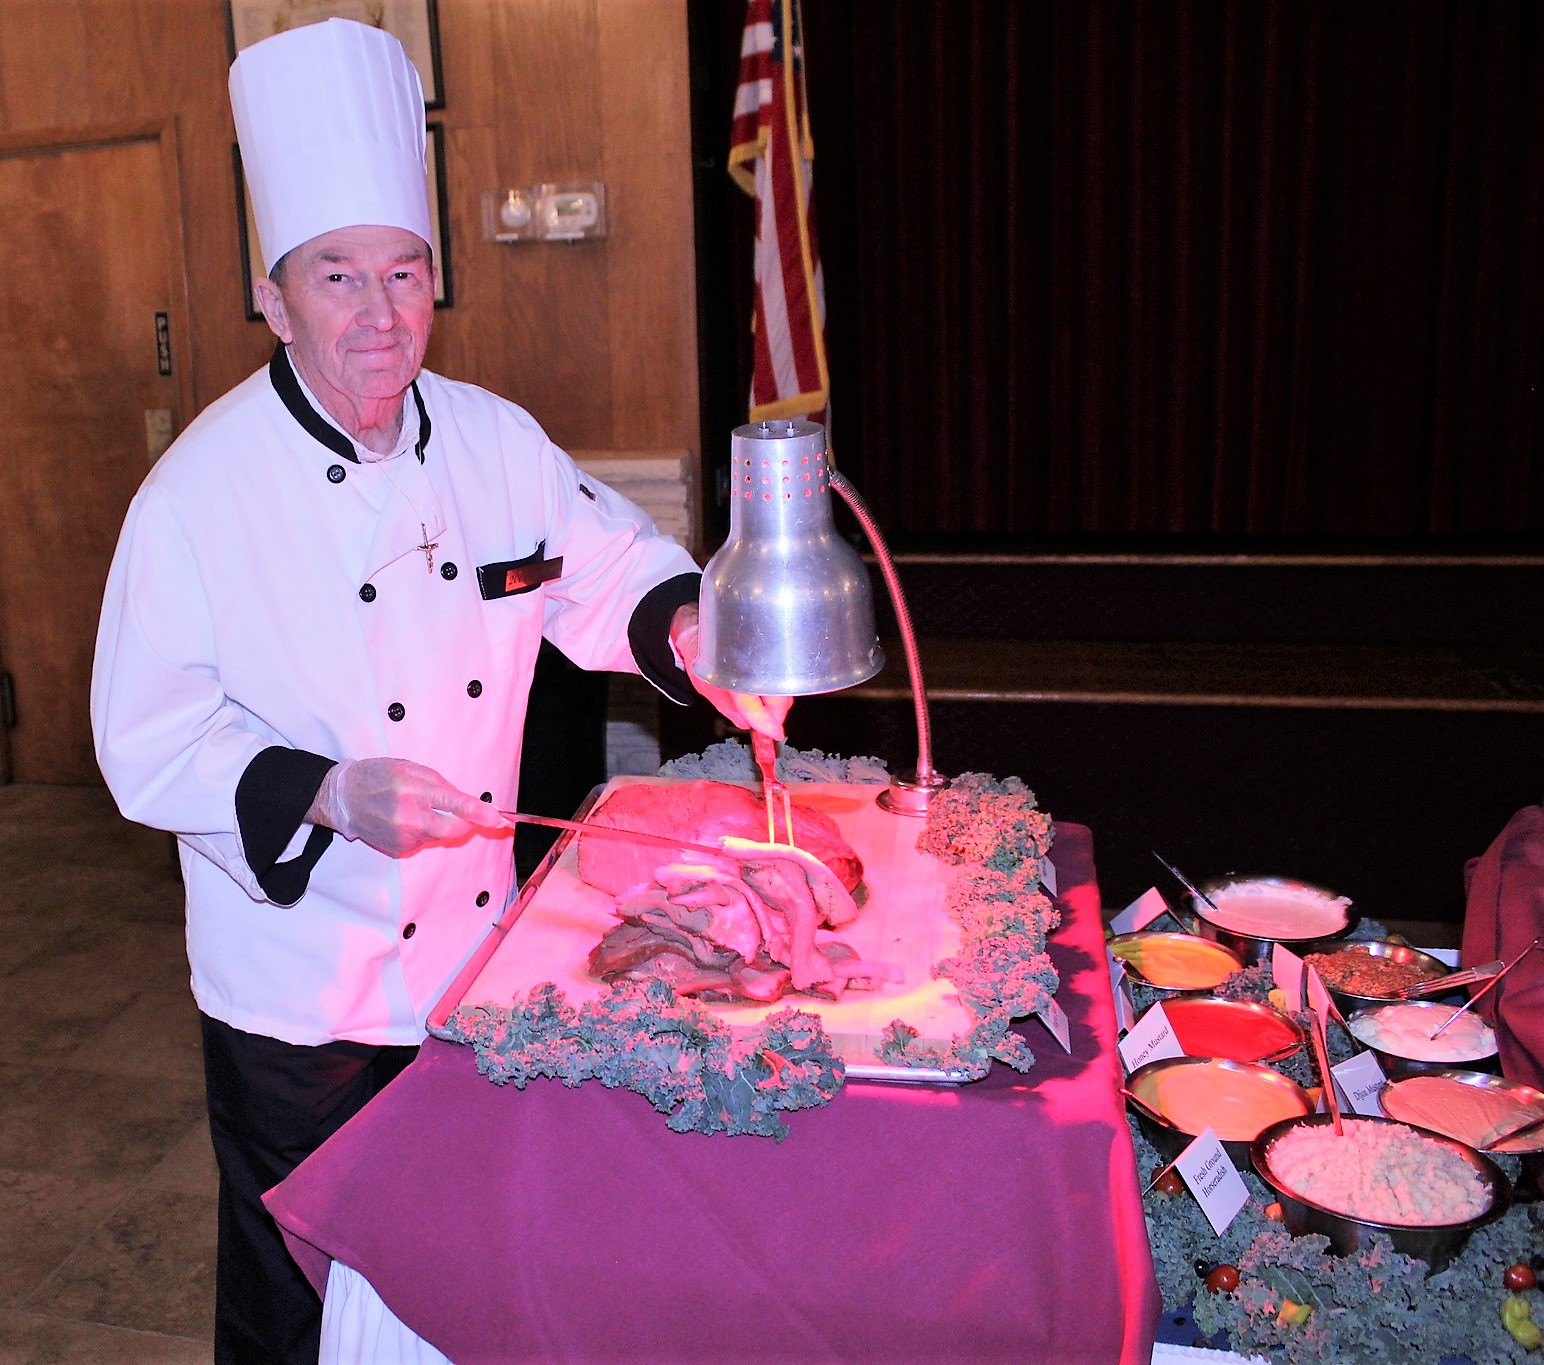 buffet carving station - Bedford County Chamber of Commerce